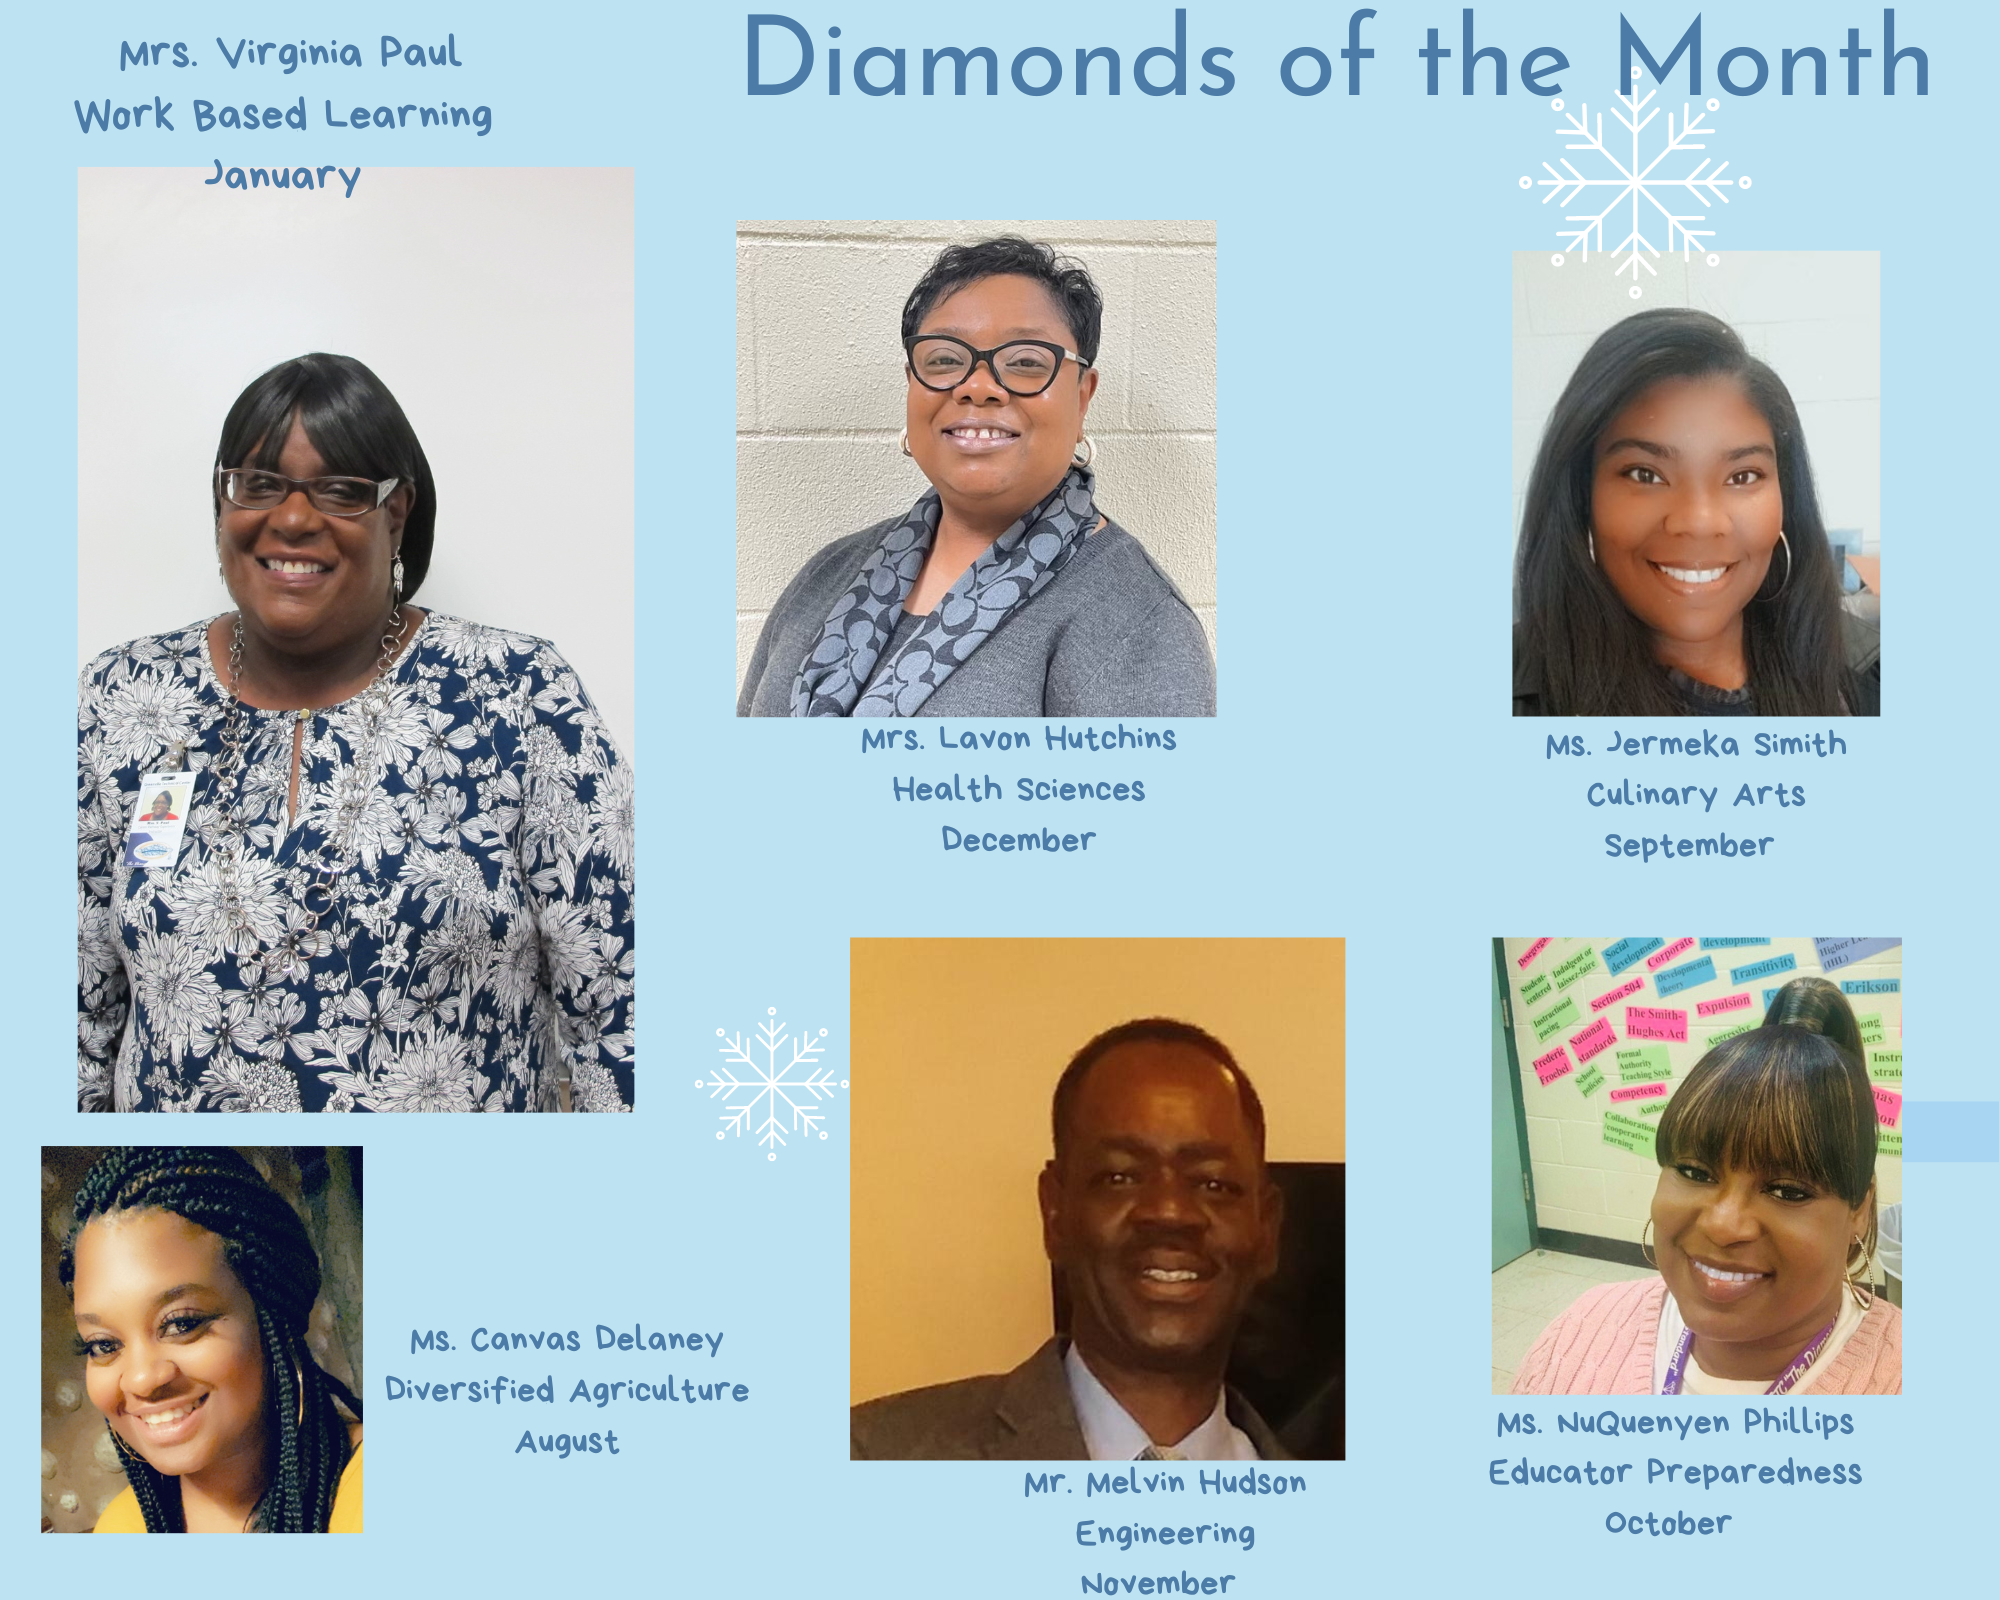 January Diamonds of the month. Mrs. Virginia Paul, Work Based Learning, January;Mrs. Lavon Hutchins, Health Sciences, December; Mr. Melvin Hudson, Engineering, November; Ms. NuQuenyen Phillips, Teacher Preparedness, October; Ms. Jermeka Smith, Culinary Arts,September, Ms. Canvas Delaney, Diversified Agriculture, August 